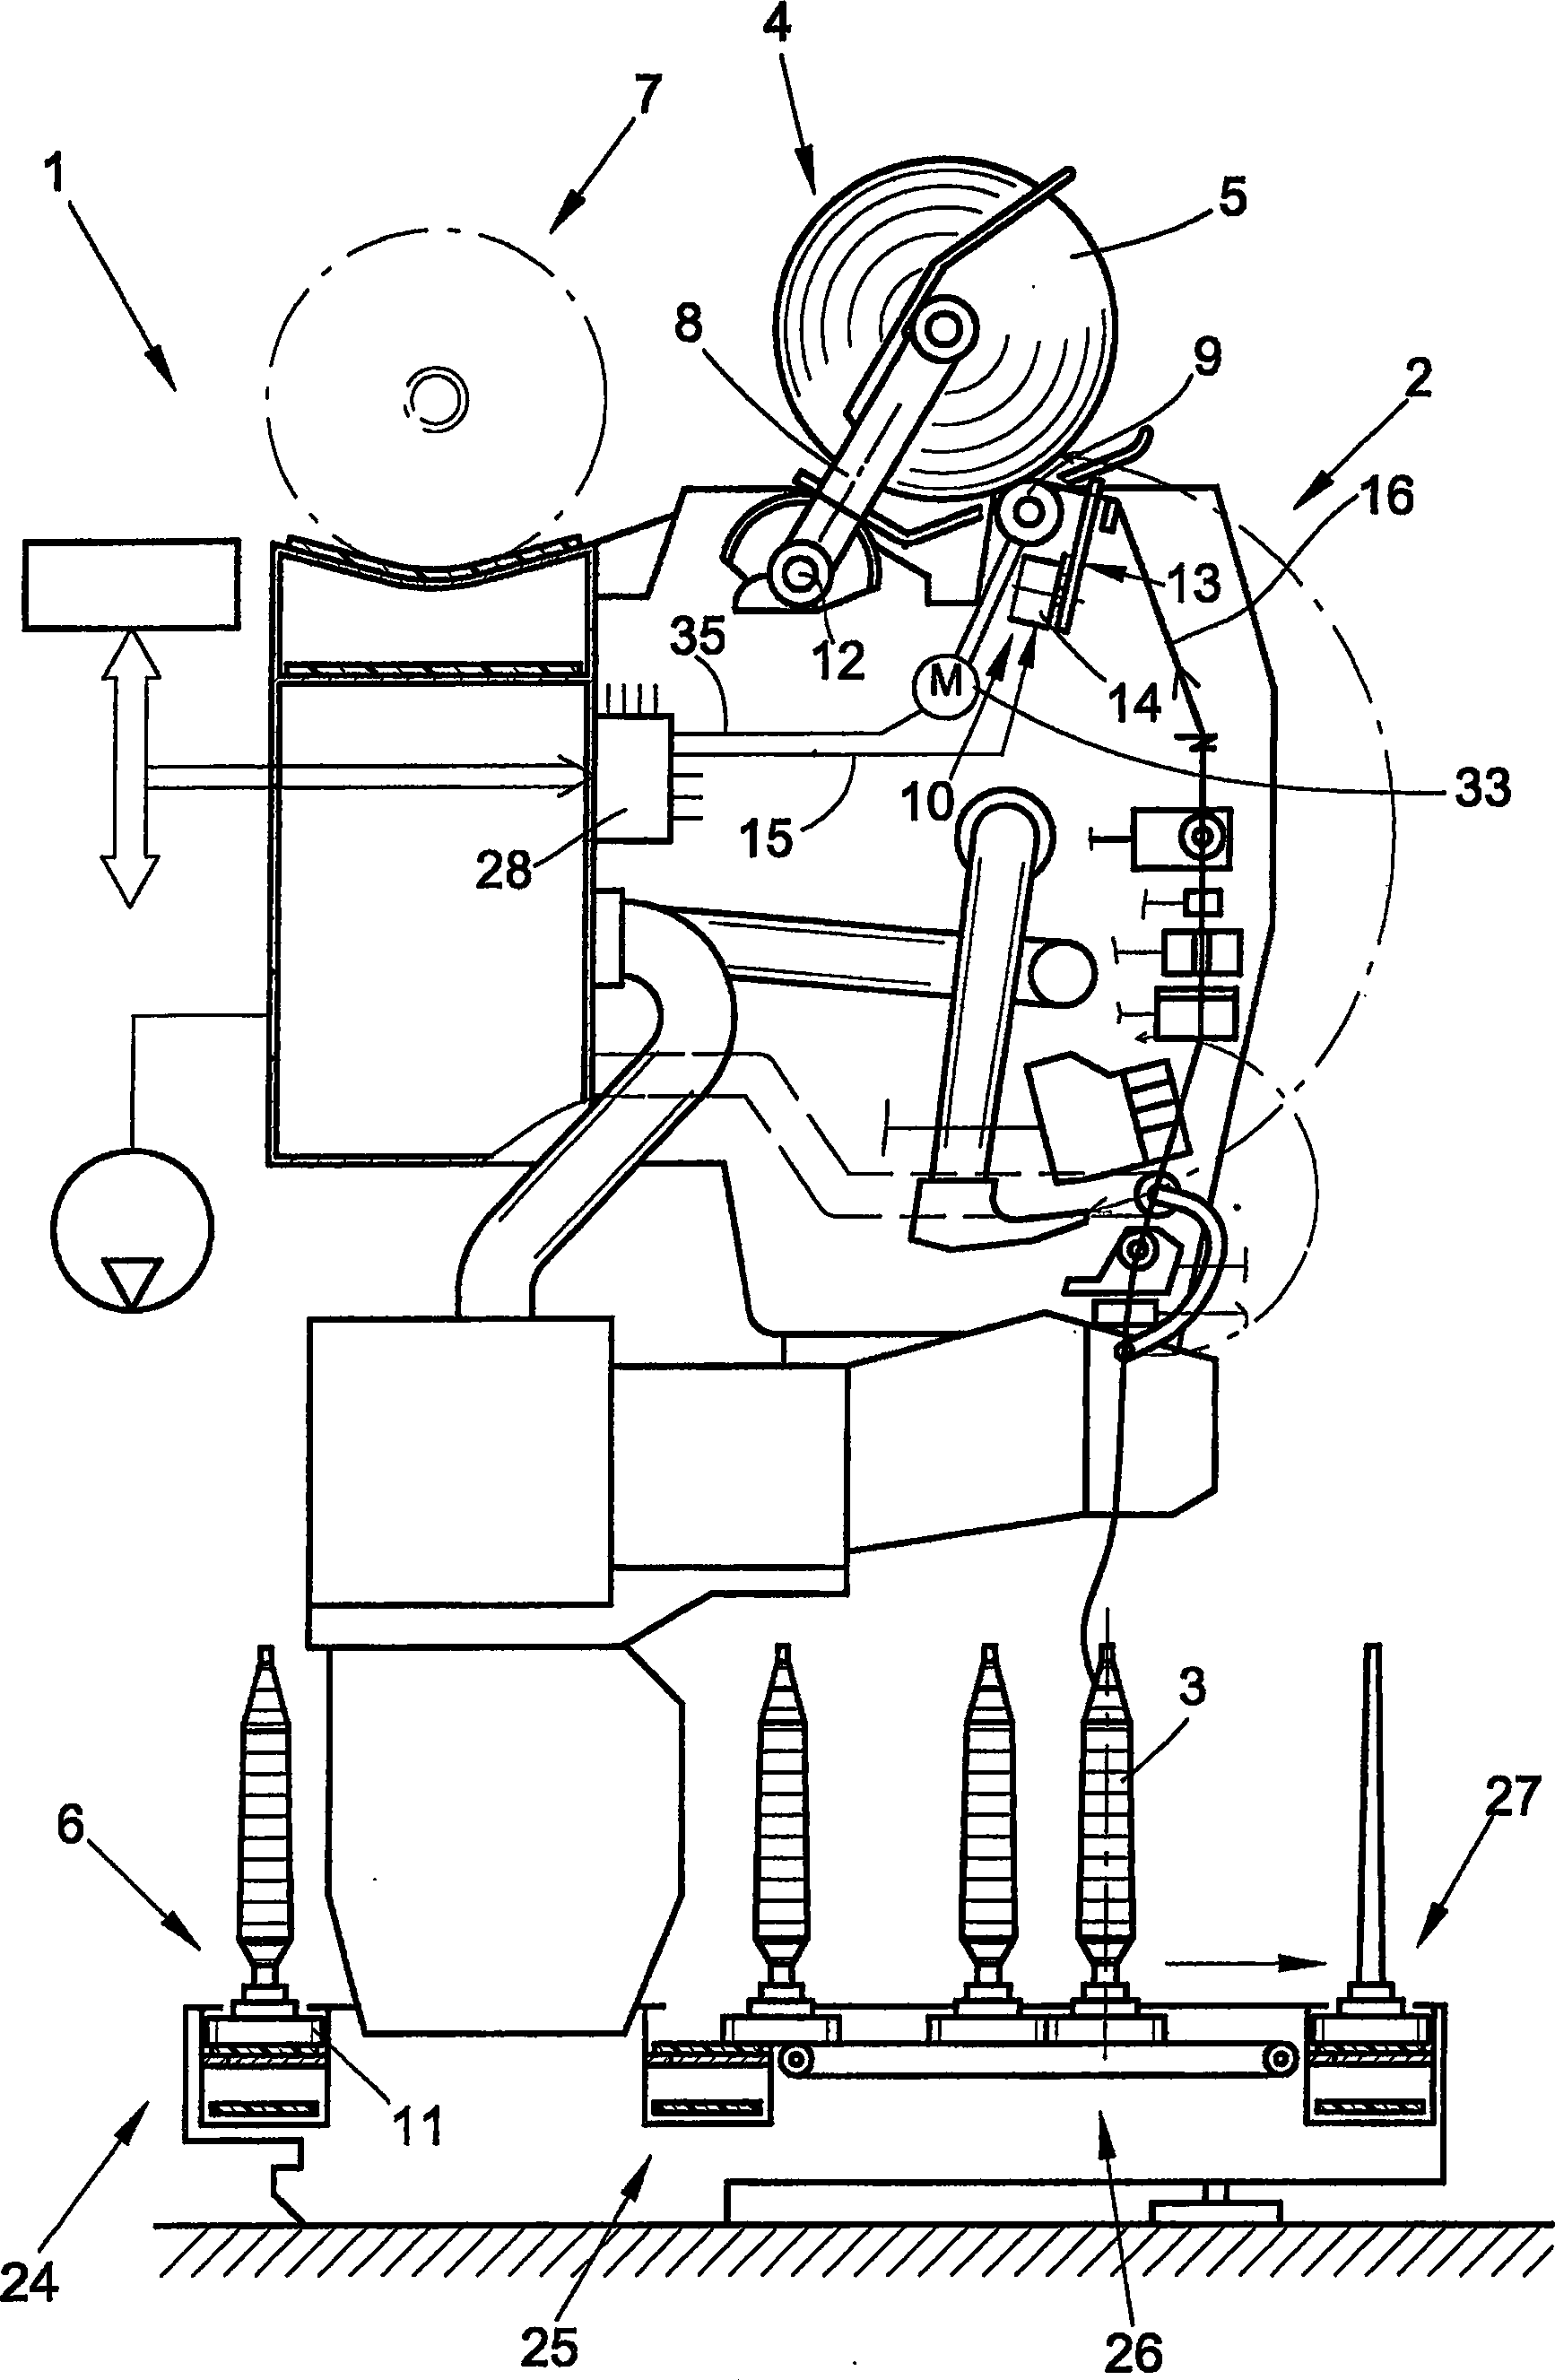 Yarn traversing device for a winding device of a textile machine producing cross-wound bobbins